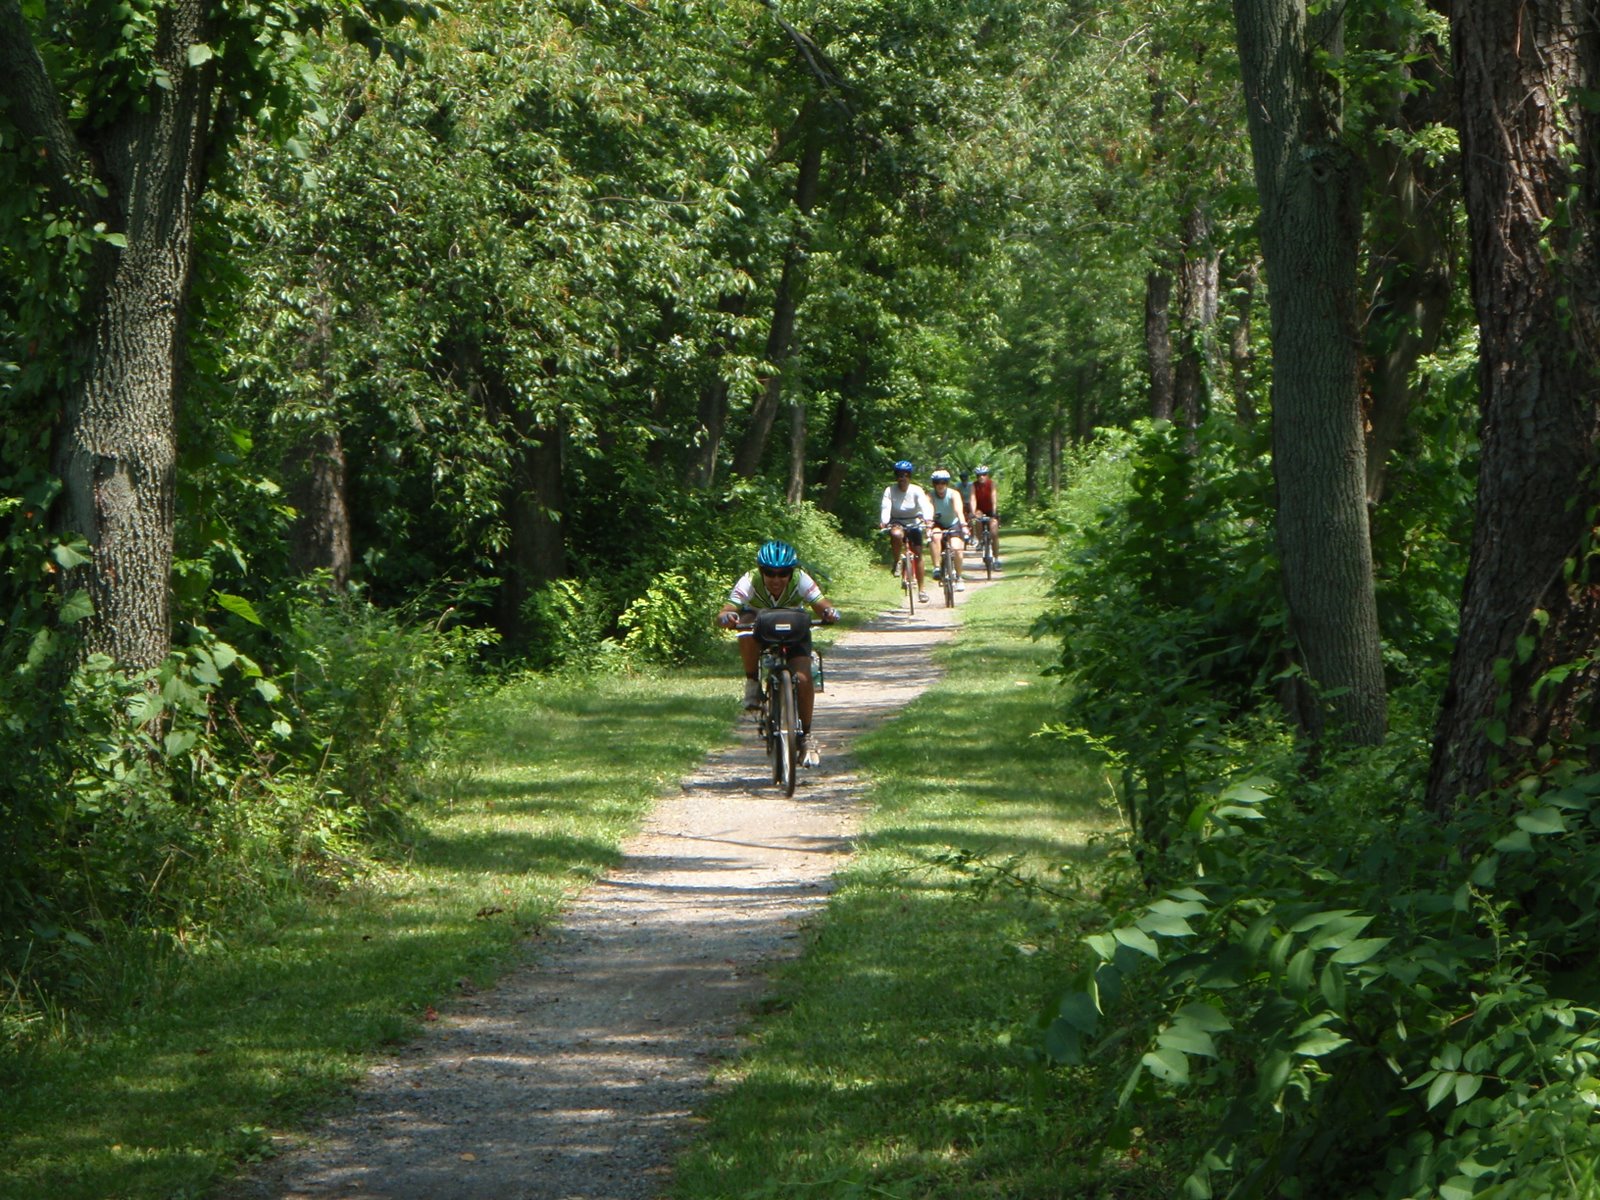 Cyclists bike through lush greenery on the C&O Canal towpath east of Cumberland, Md., Aug. 2, 2008. (AP Photo/Gerald Herbert)